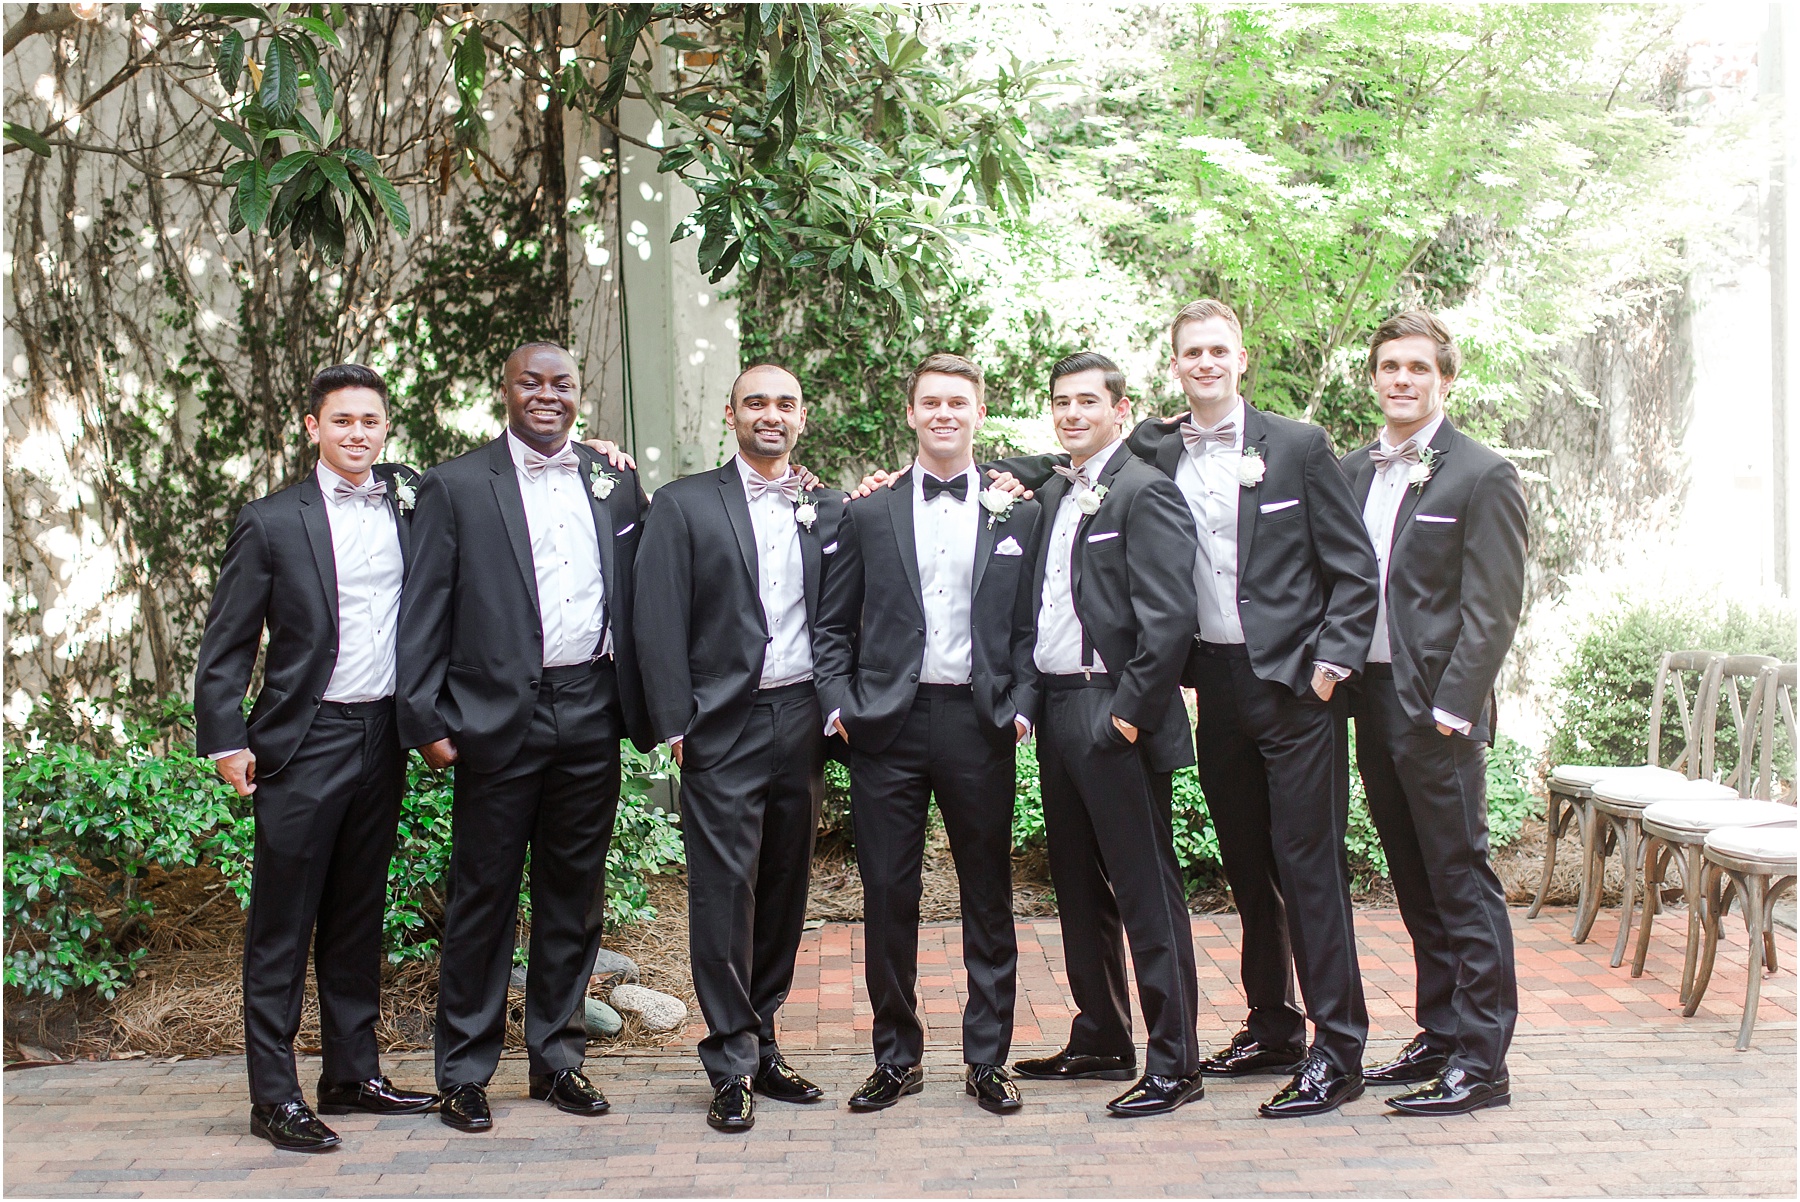 Bakery 105 and The Cottage Groomsmen in Classic Black and White Tux